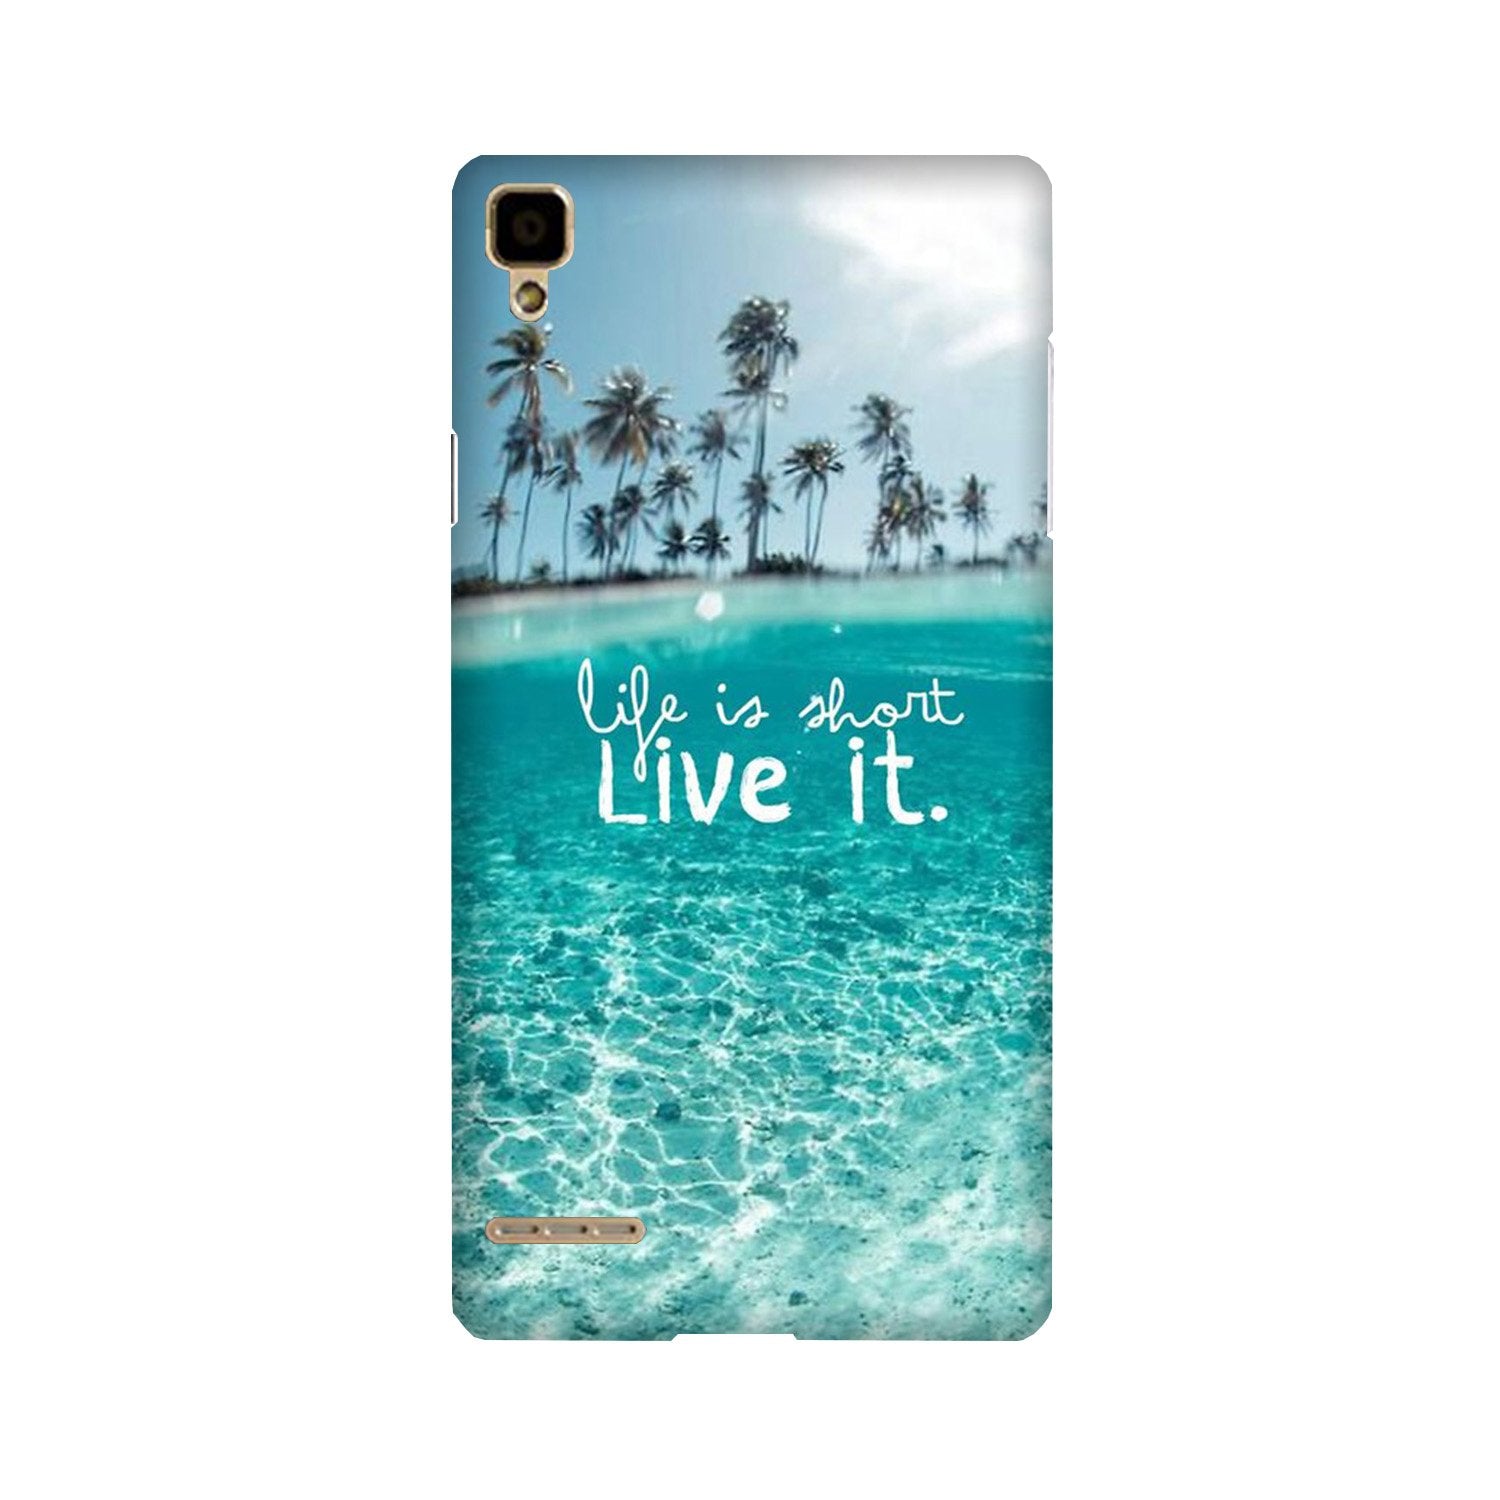 Life is short live it Case for Oppo F1